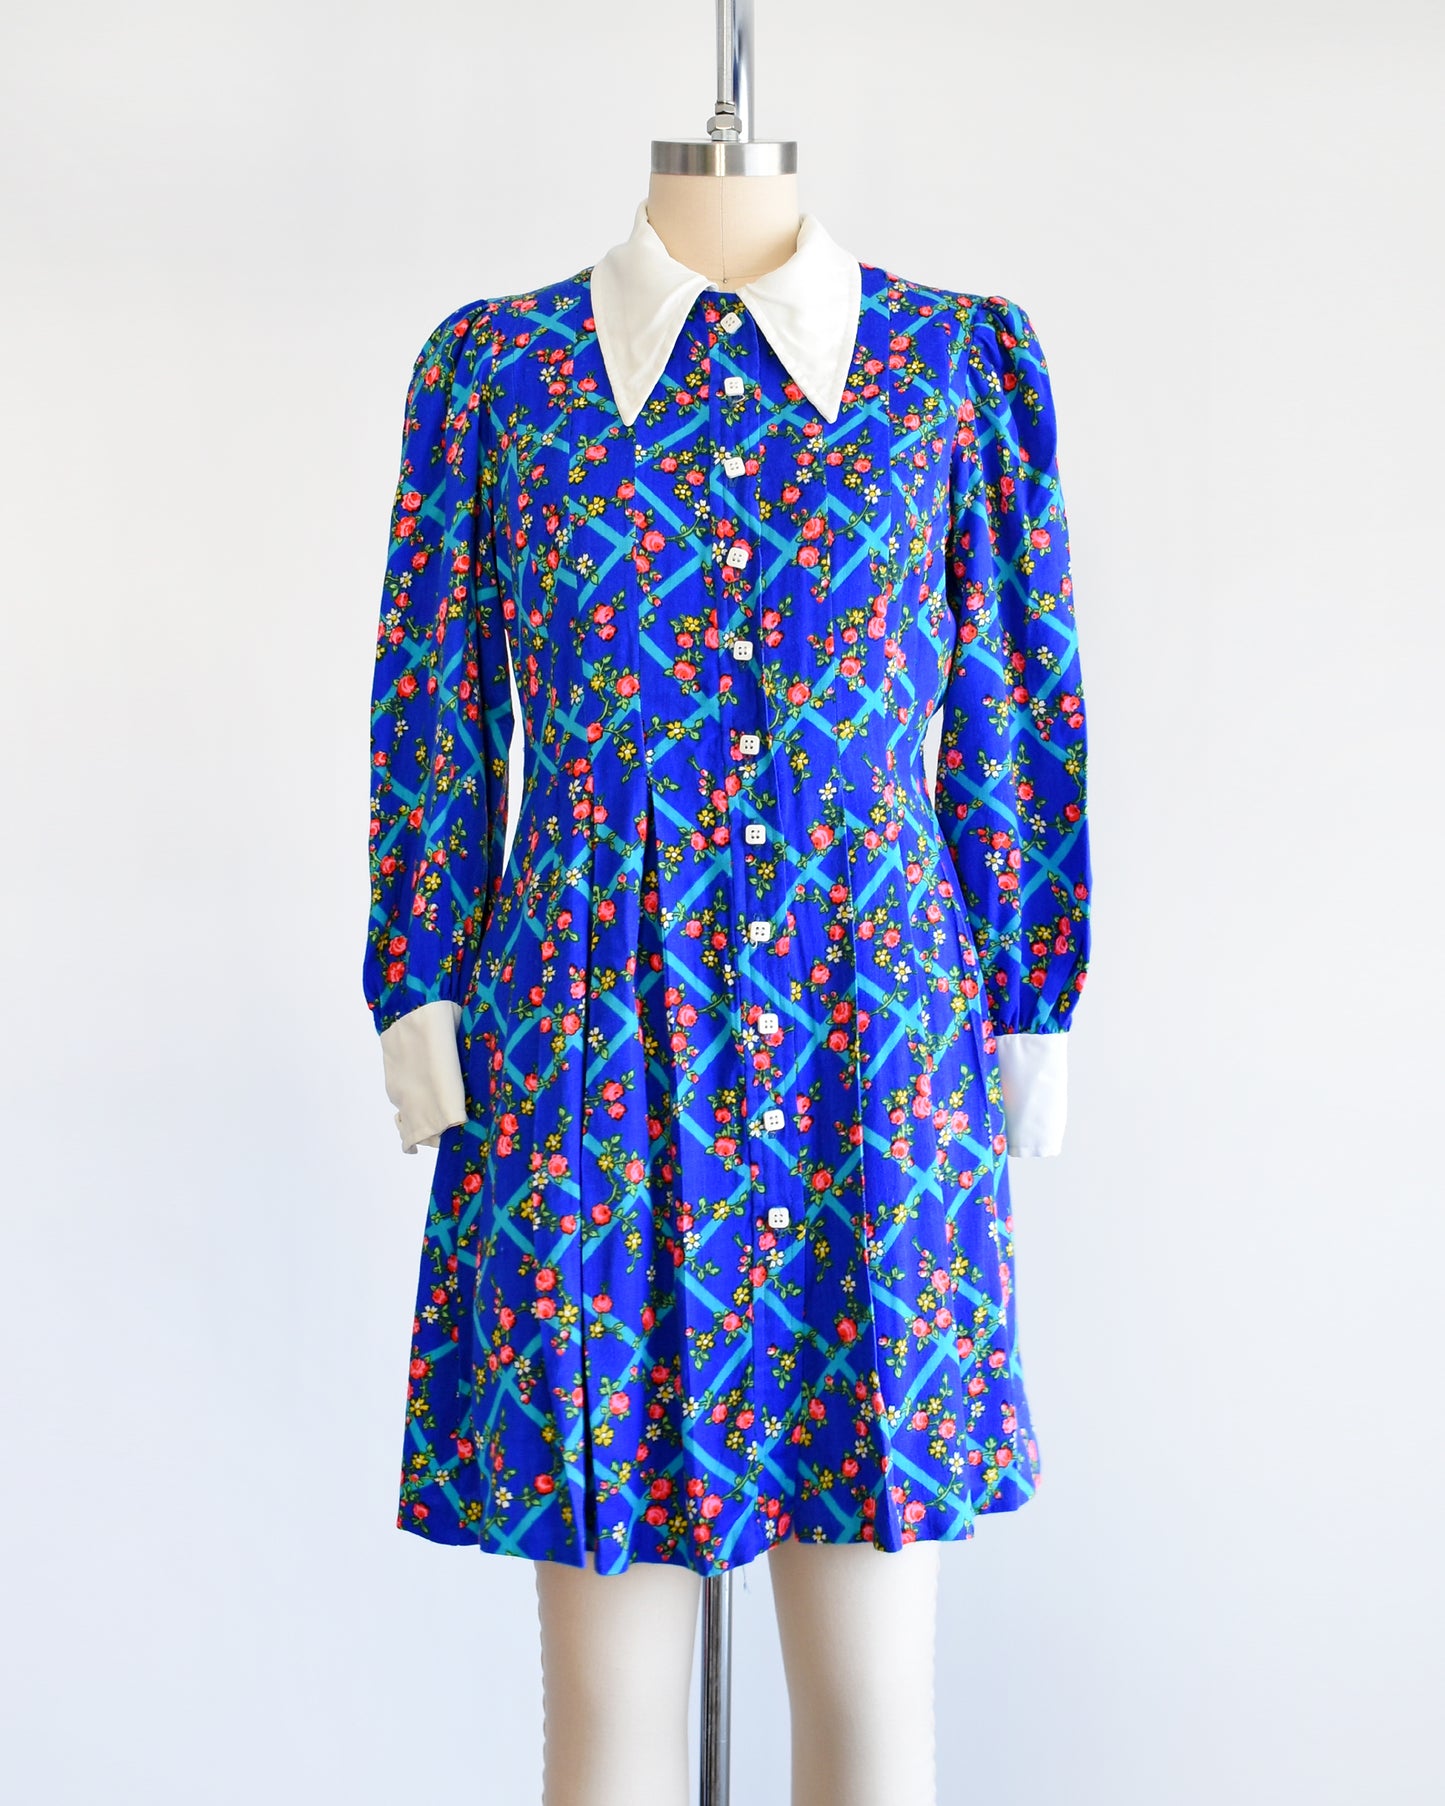 A vintage 1970s blue floral mini dress that has a white collar with matching cuffs, and white buttons down the front.